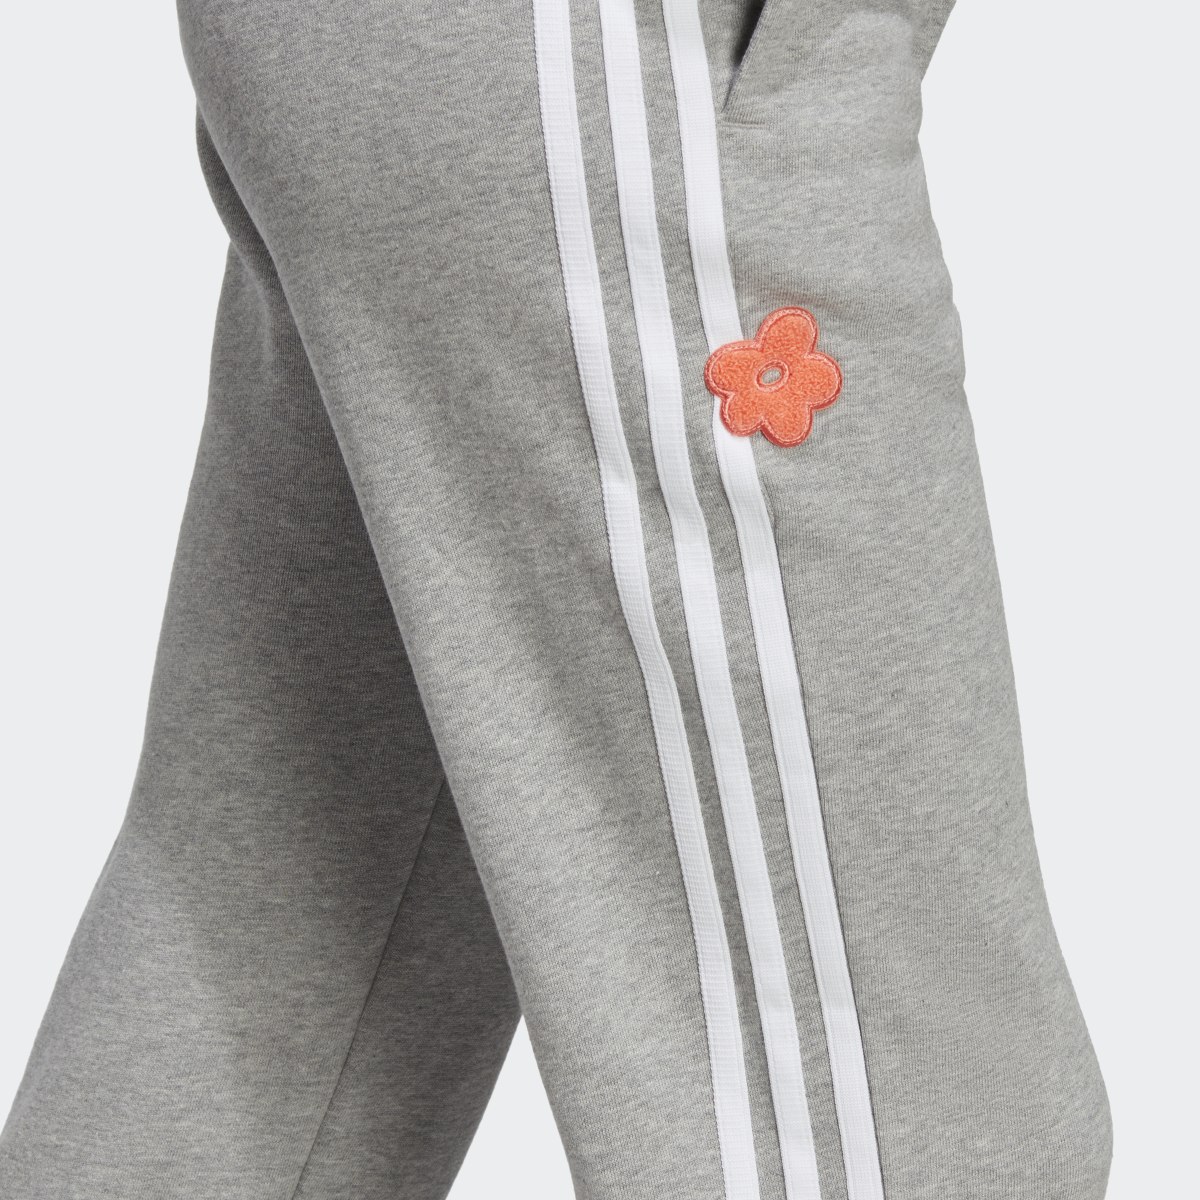 Adidas 3-Stripes High Rise Joggers with Chenille Flower Patches. 8